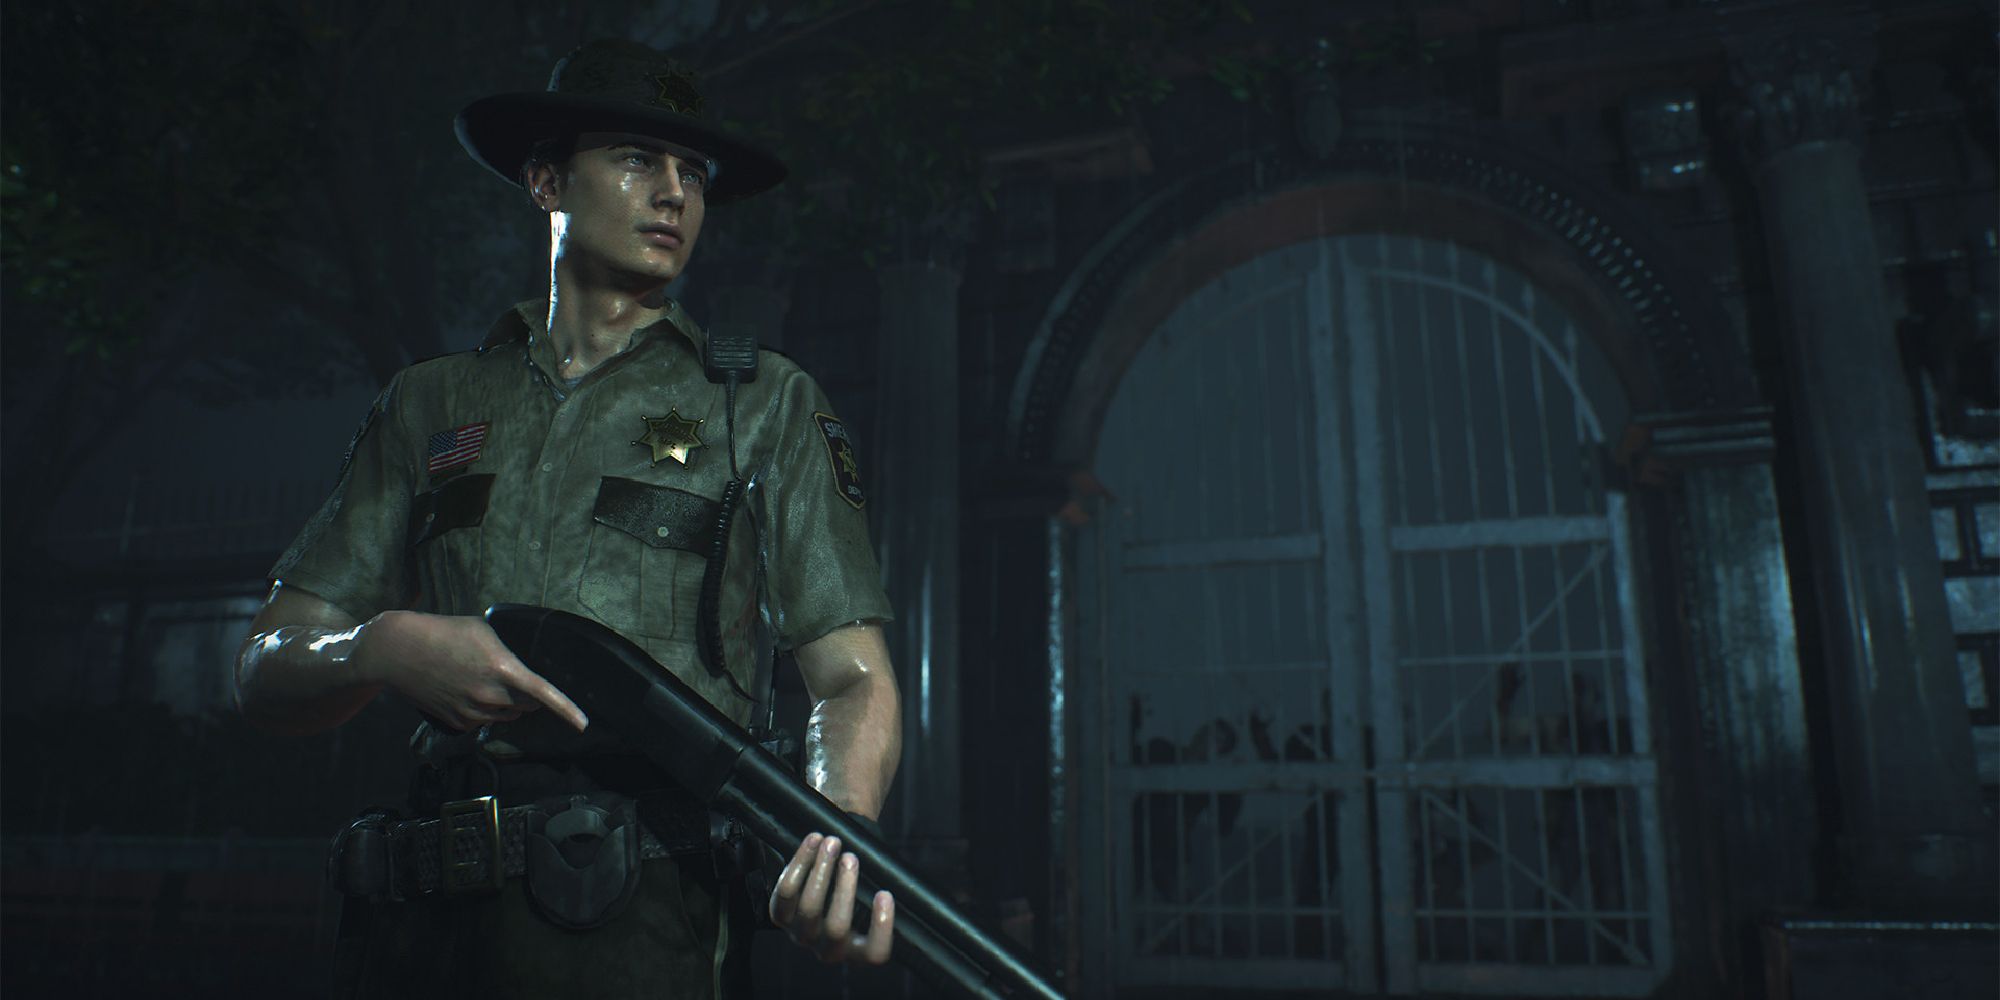 Leon in an alternate Sheriff outfit in the REmake 2